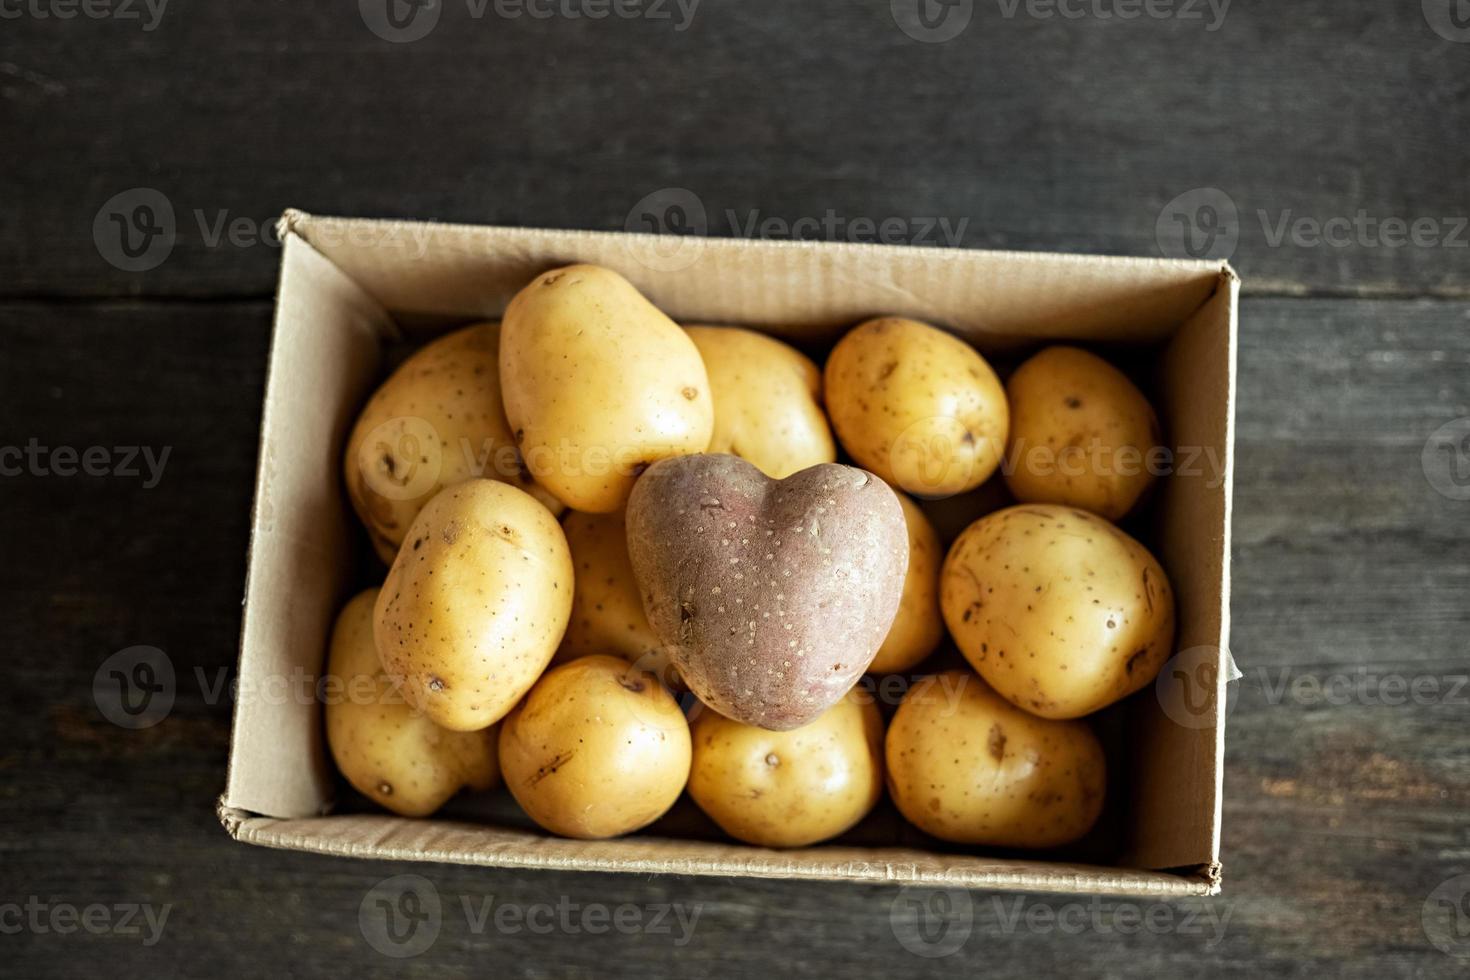 Red potato in the shape of a heart in a cardboard box among white potatoes. photo